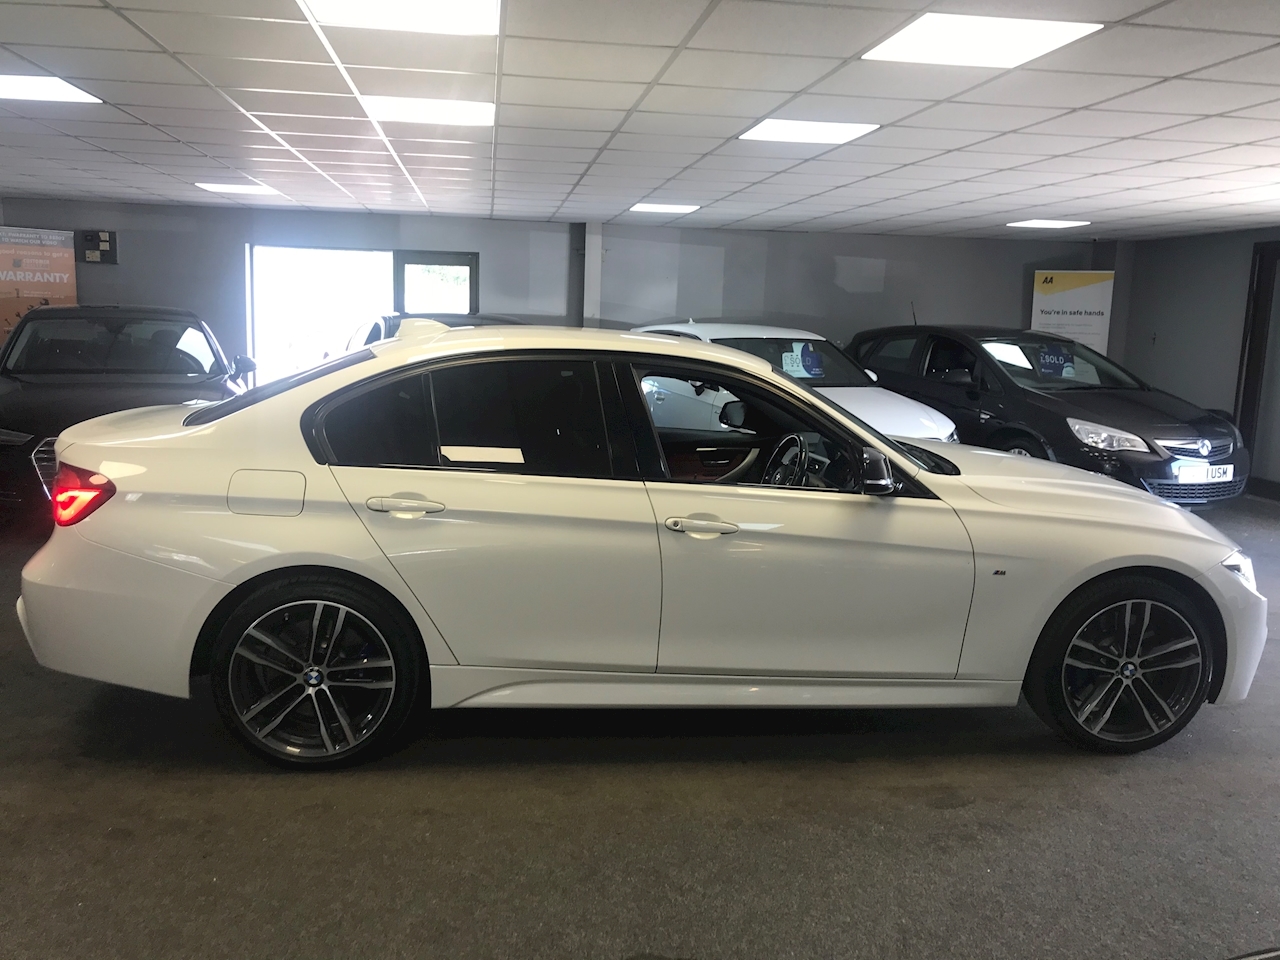 3.0 335d M Sport Shadow Edition Saloon 4dr Diesel Auto xDrive (s/s) (313 ps)